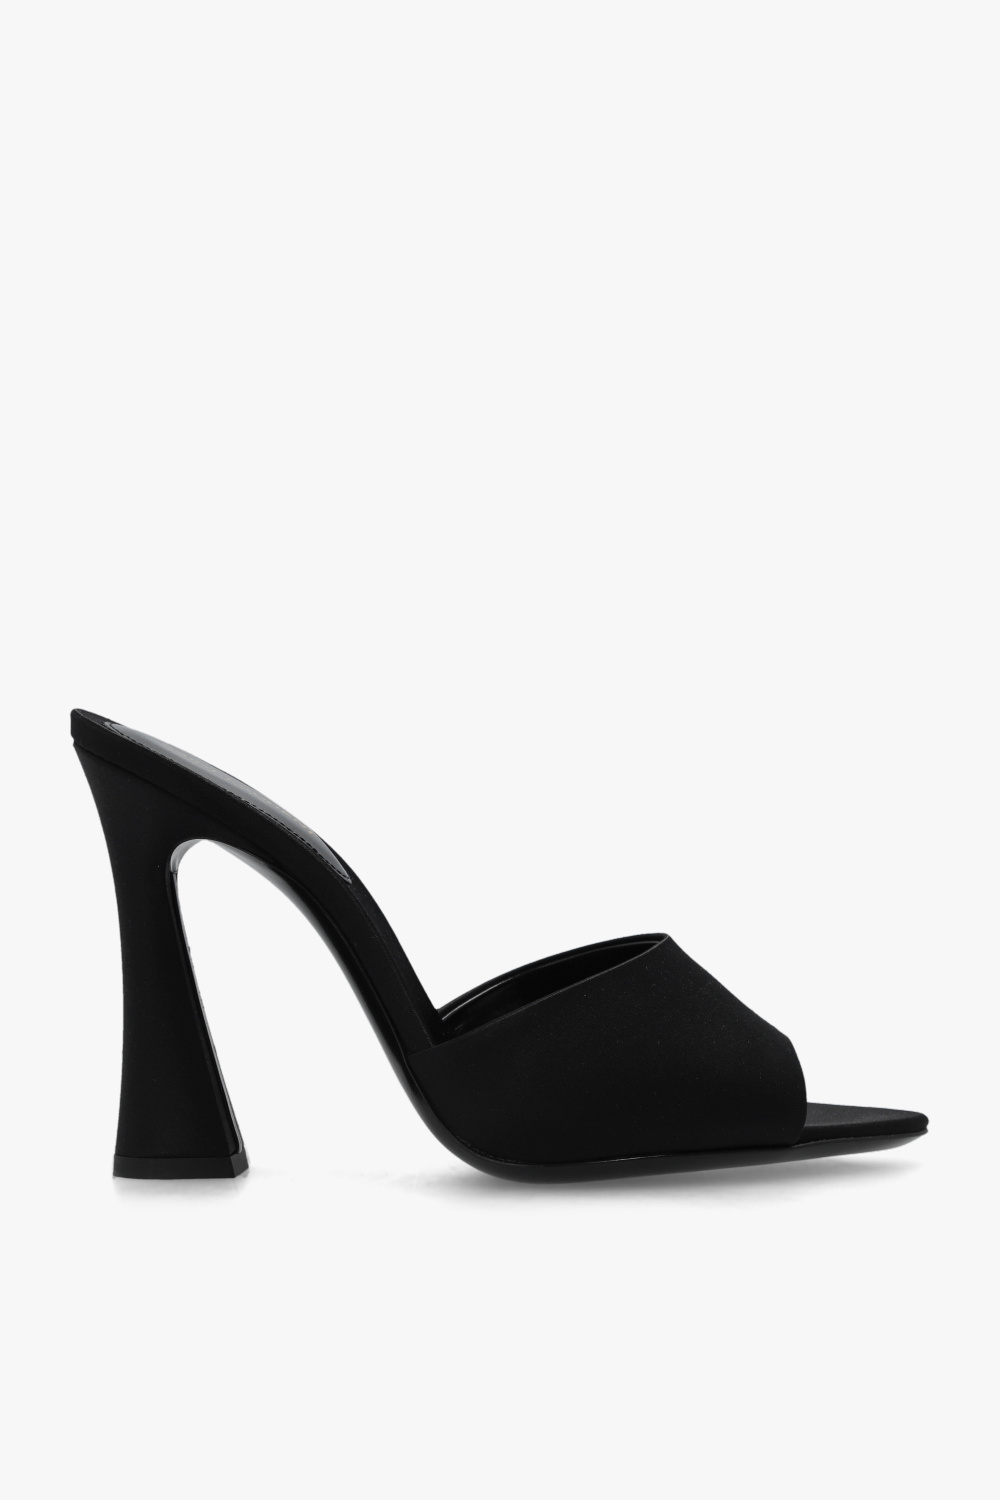 Louis Vuitton Womens Block Heel Pumps & Mules, Black, 40 (Stock Confirmation Required)